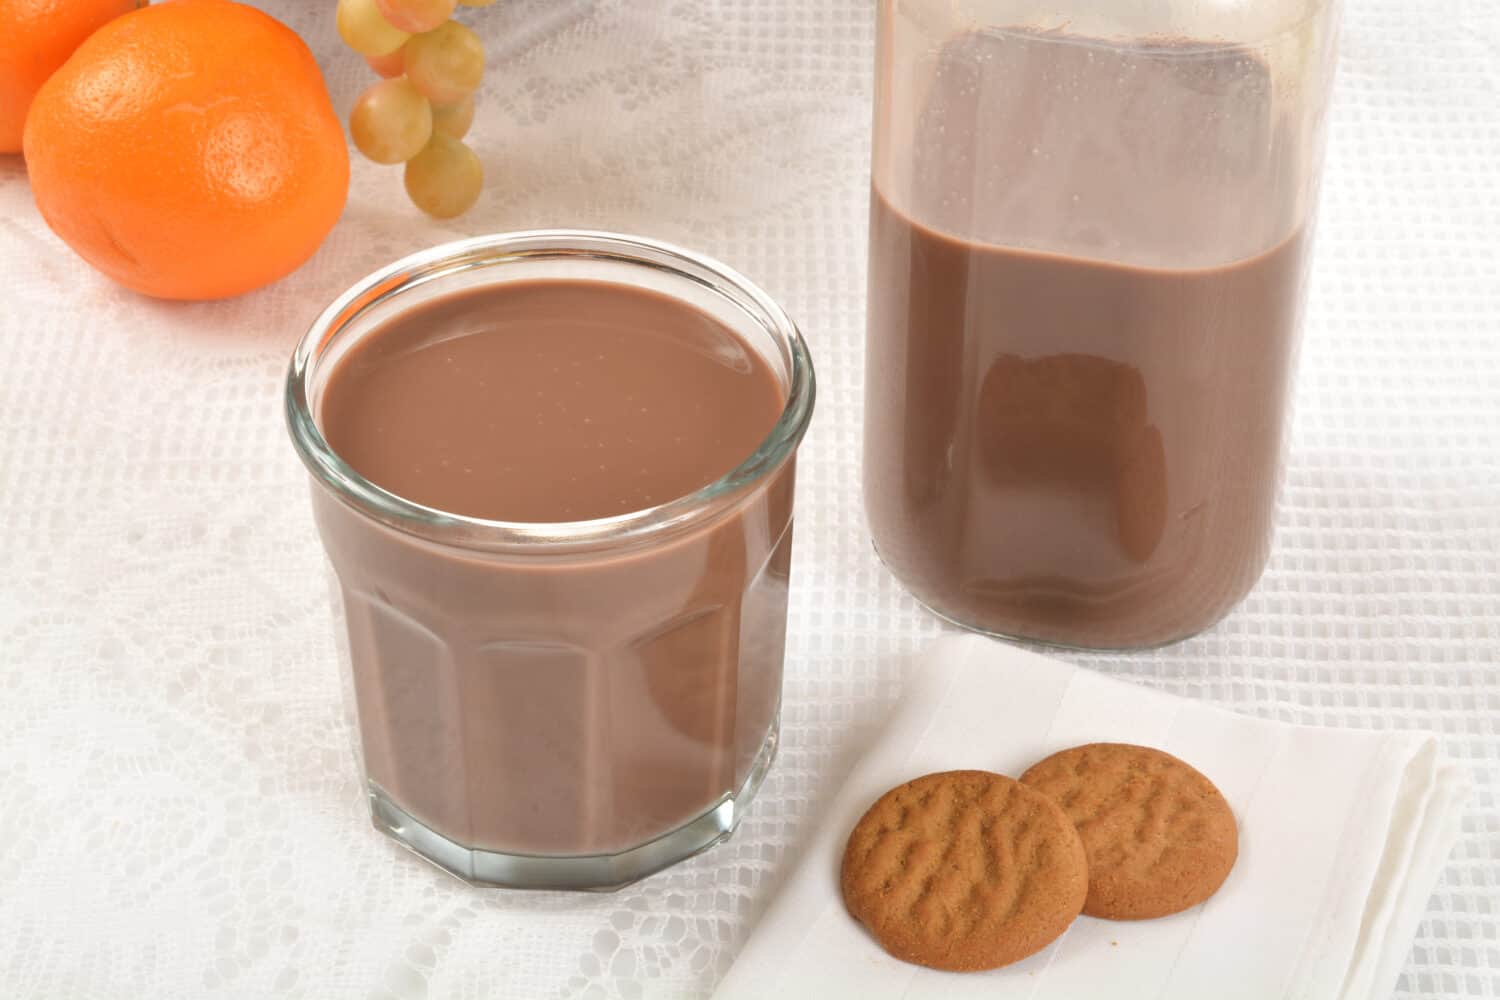 A glass of chocolate milk and ginger snap cookies